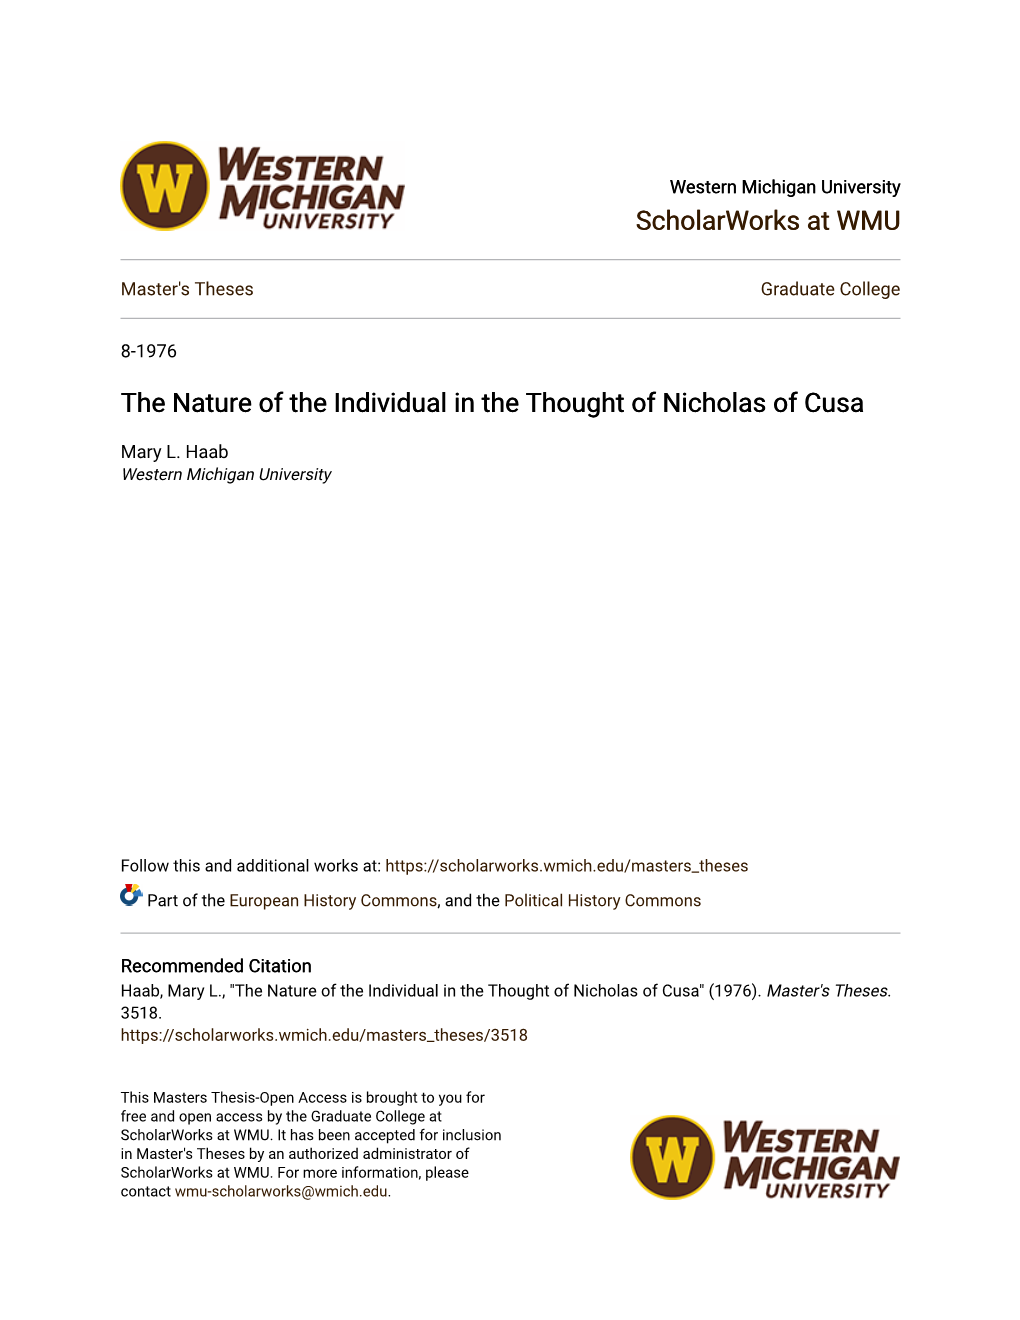 The Nature of the Individual in the Thought of Nicholas of Cusa